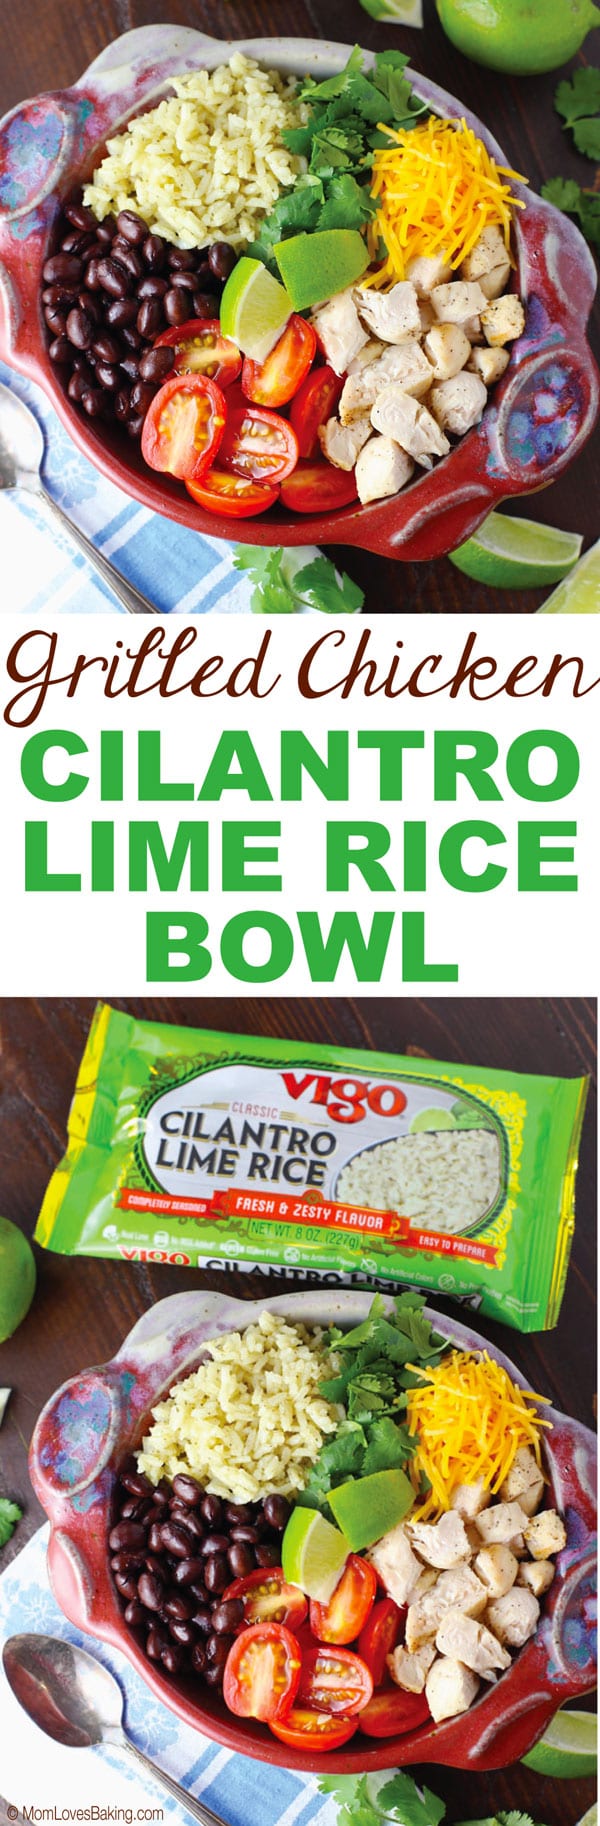 Grilled Chicken Cilantro Lime Rice Bowl